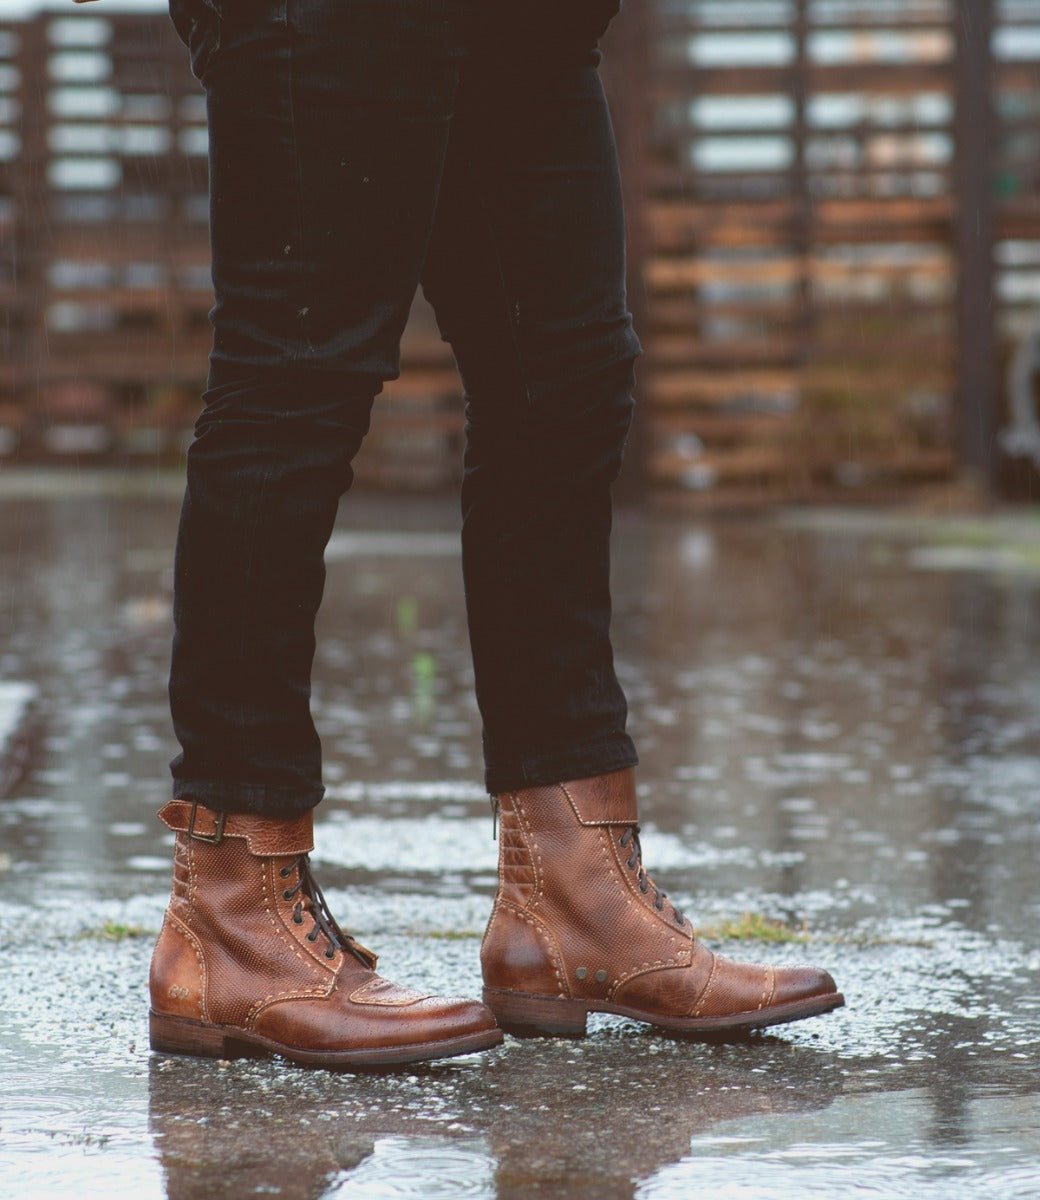 A person standing in a puddle wearing Bed Stu's Walker Tan Rustic Mason BFS boots and black jeans, with wet ground and wooden pallets in the background.